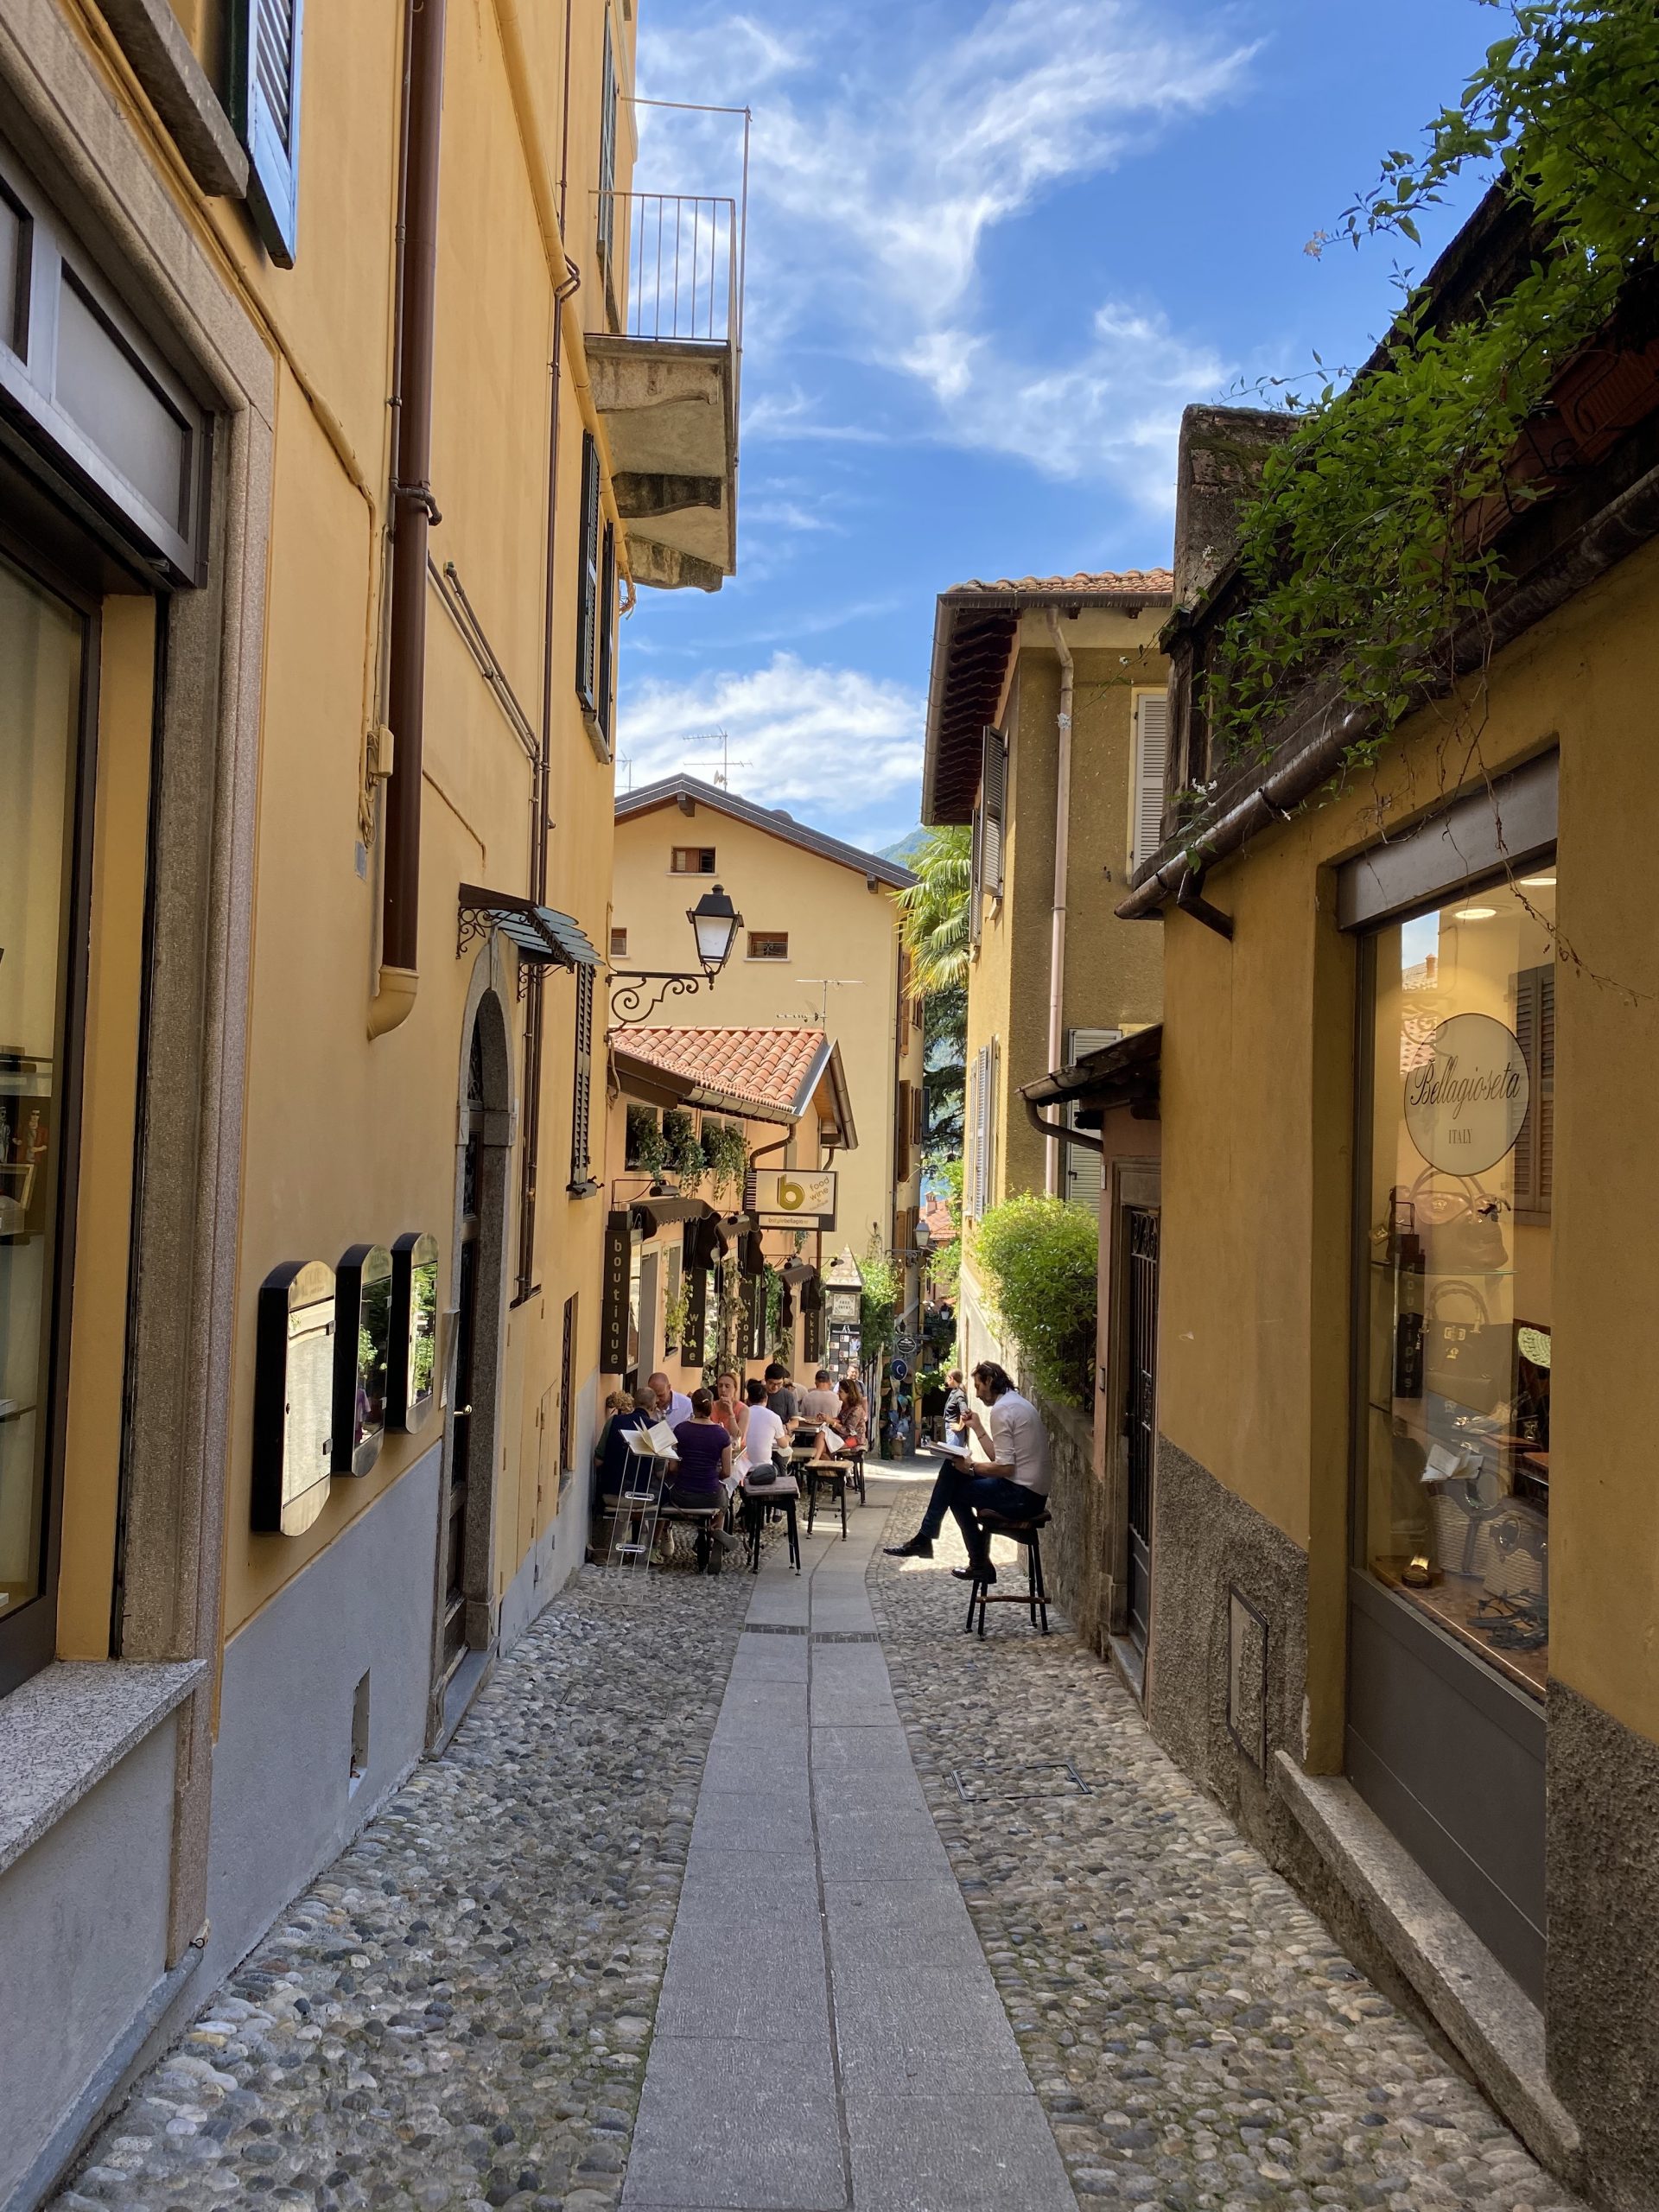 A cobbled passageway leading downhill with yellow buildings on each side and people eating outside a restaurant on the left